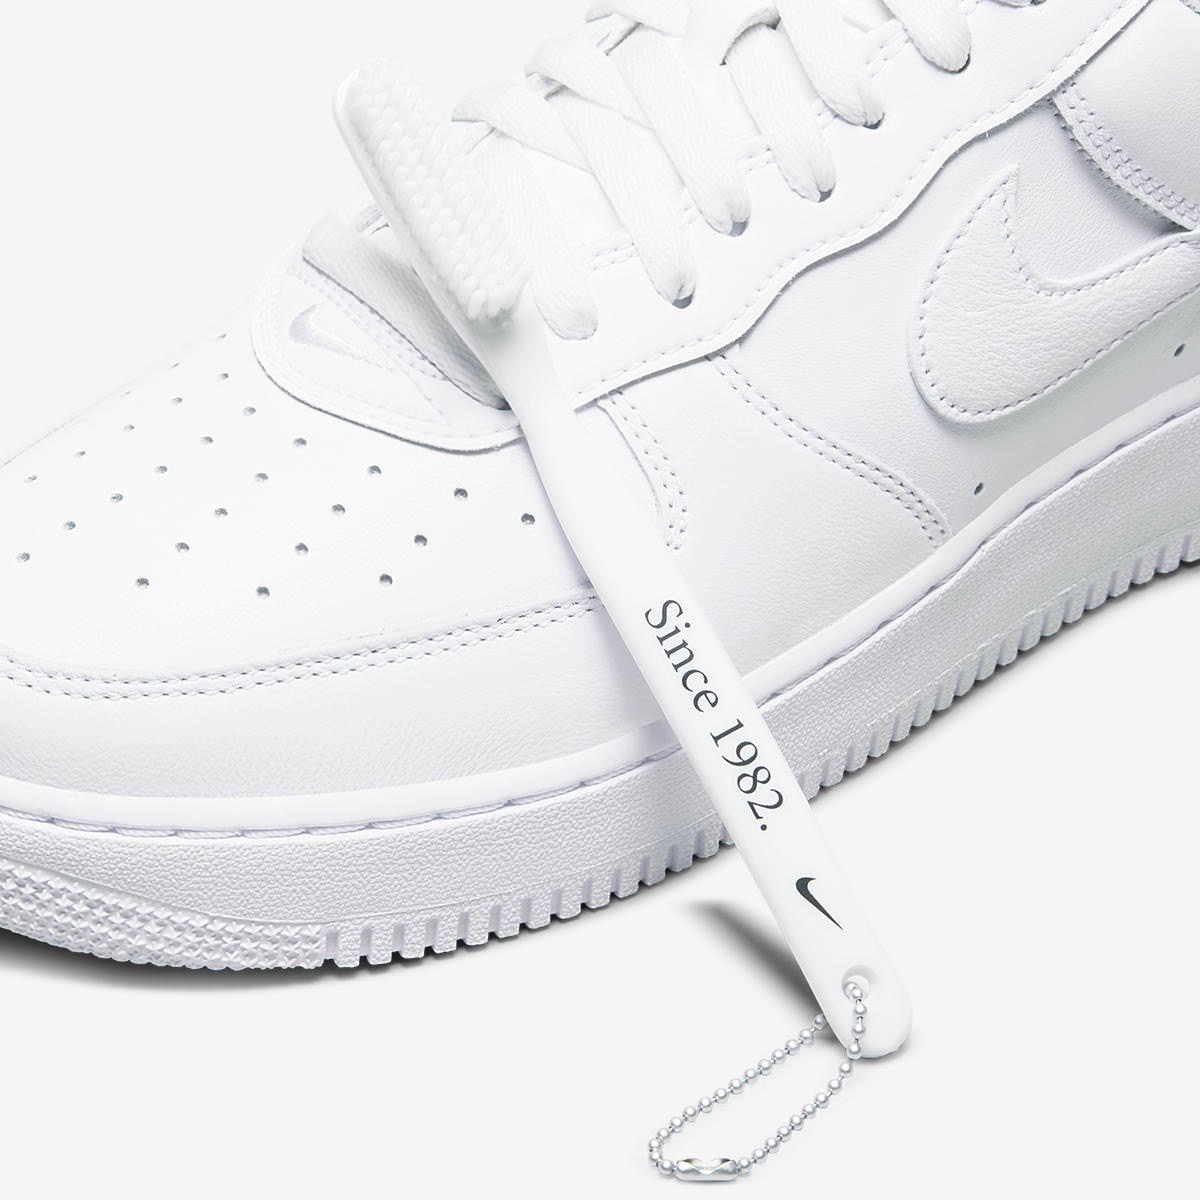 Nike Air Force 1 Low Retro Anniversary Edition “Since .” White